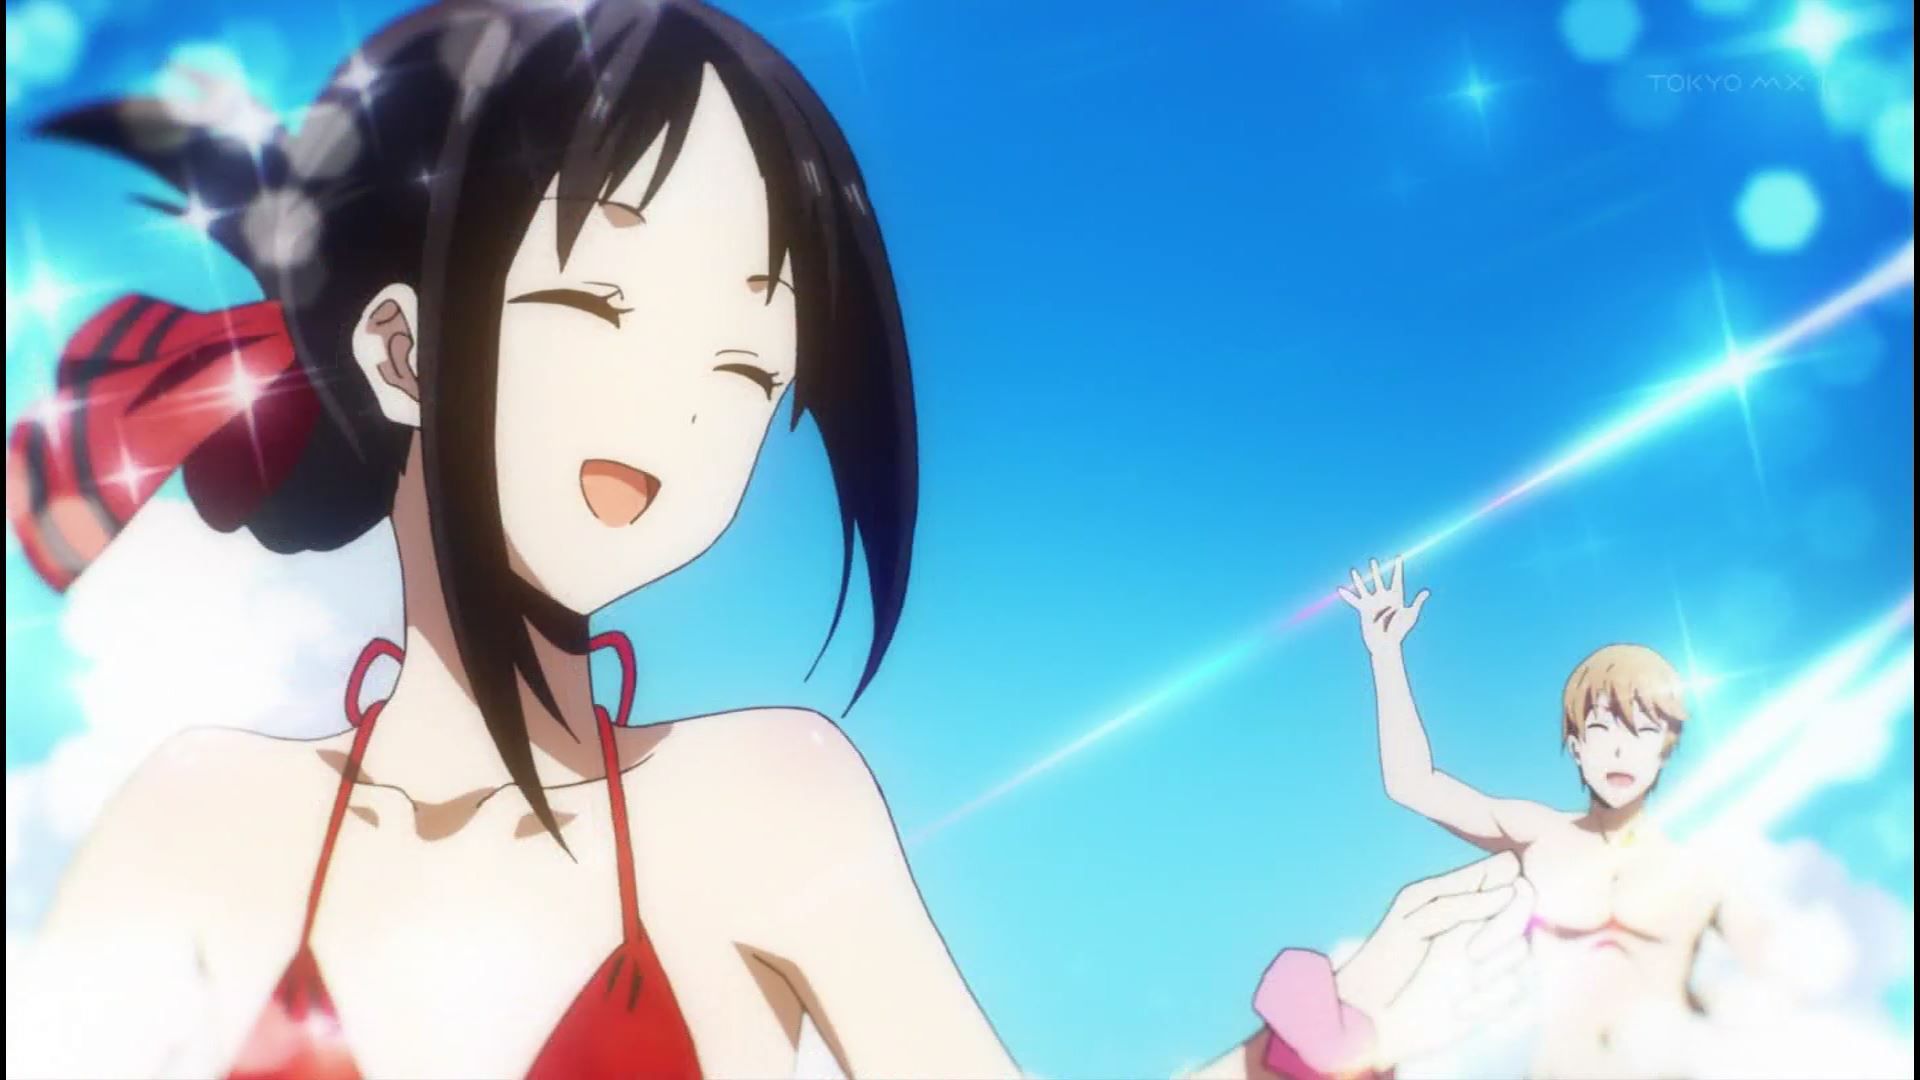 Anime [Kaguya want to be heard] 2 in the story of a girl erotic Pettanko swimsuit and breasts! 7